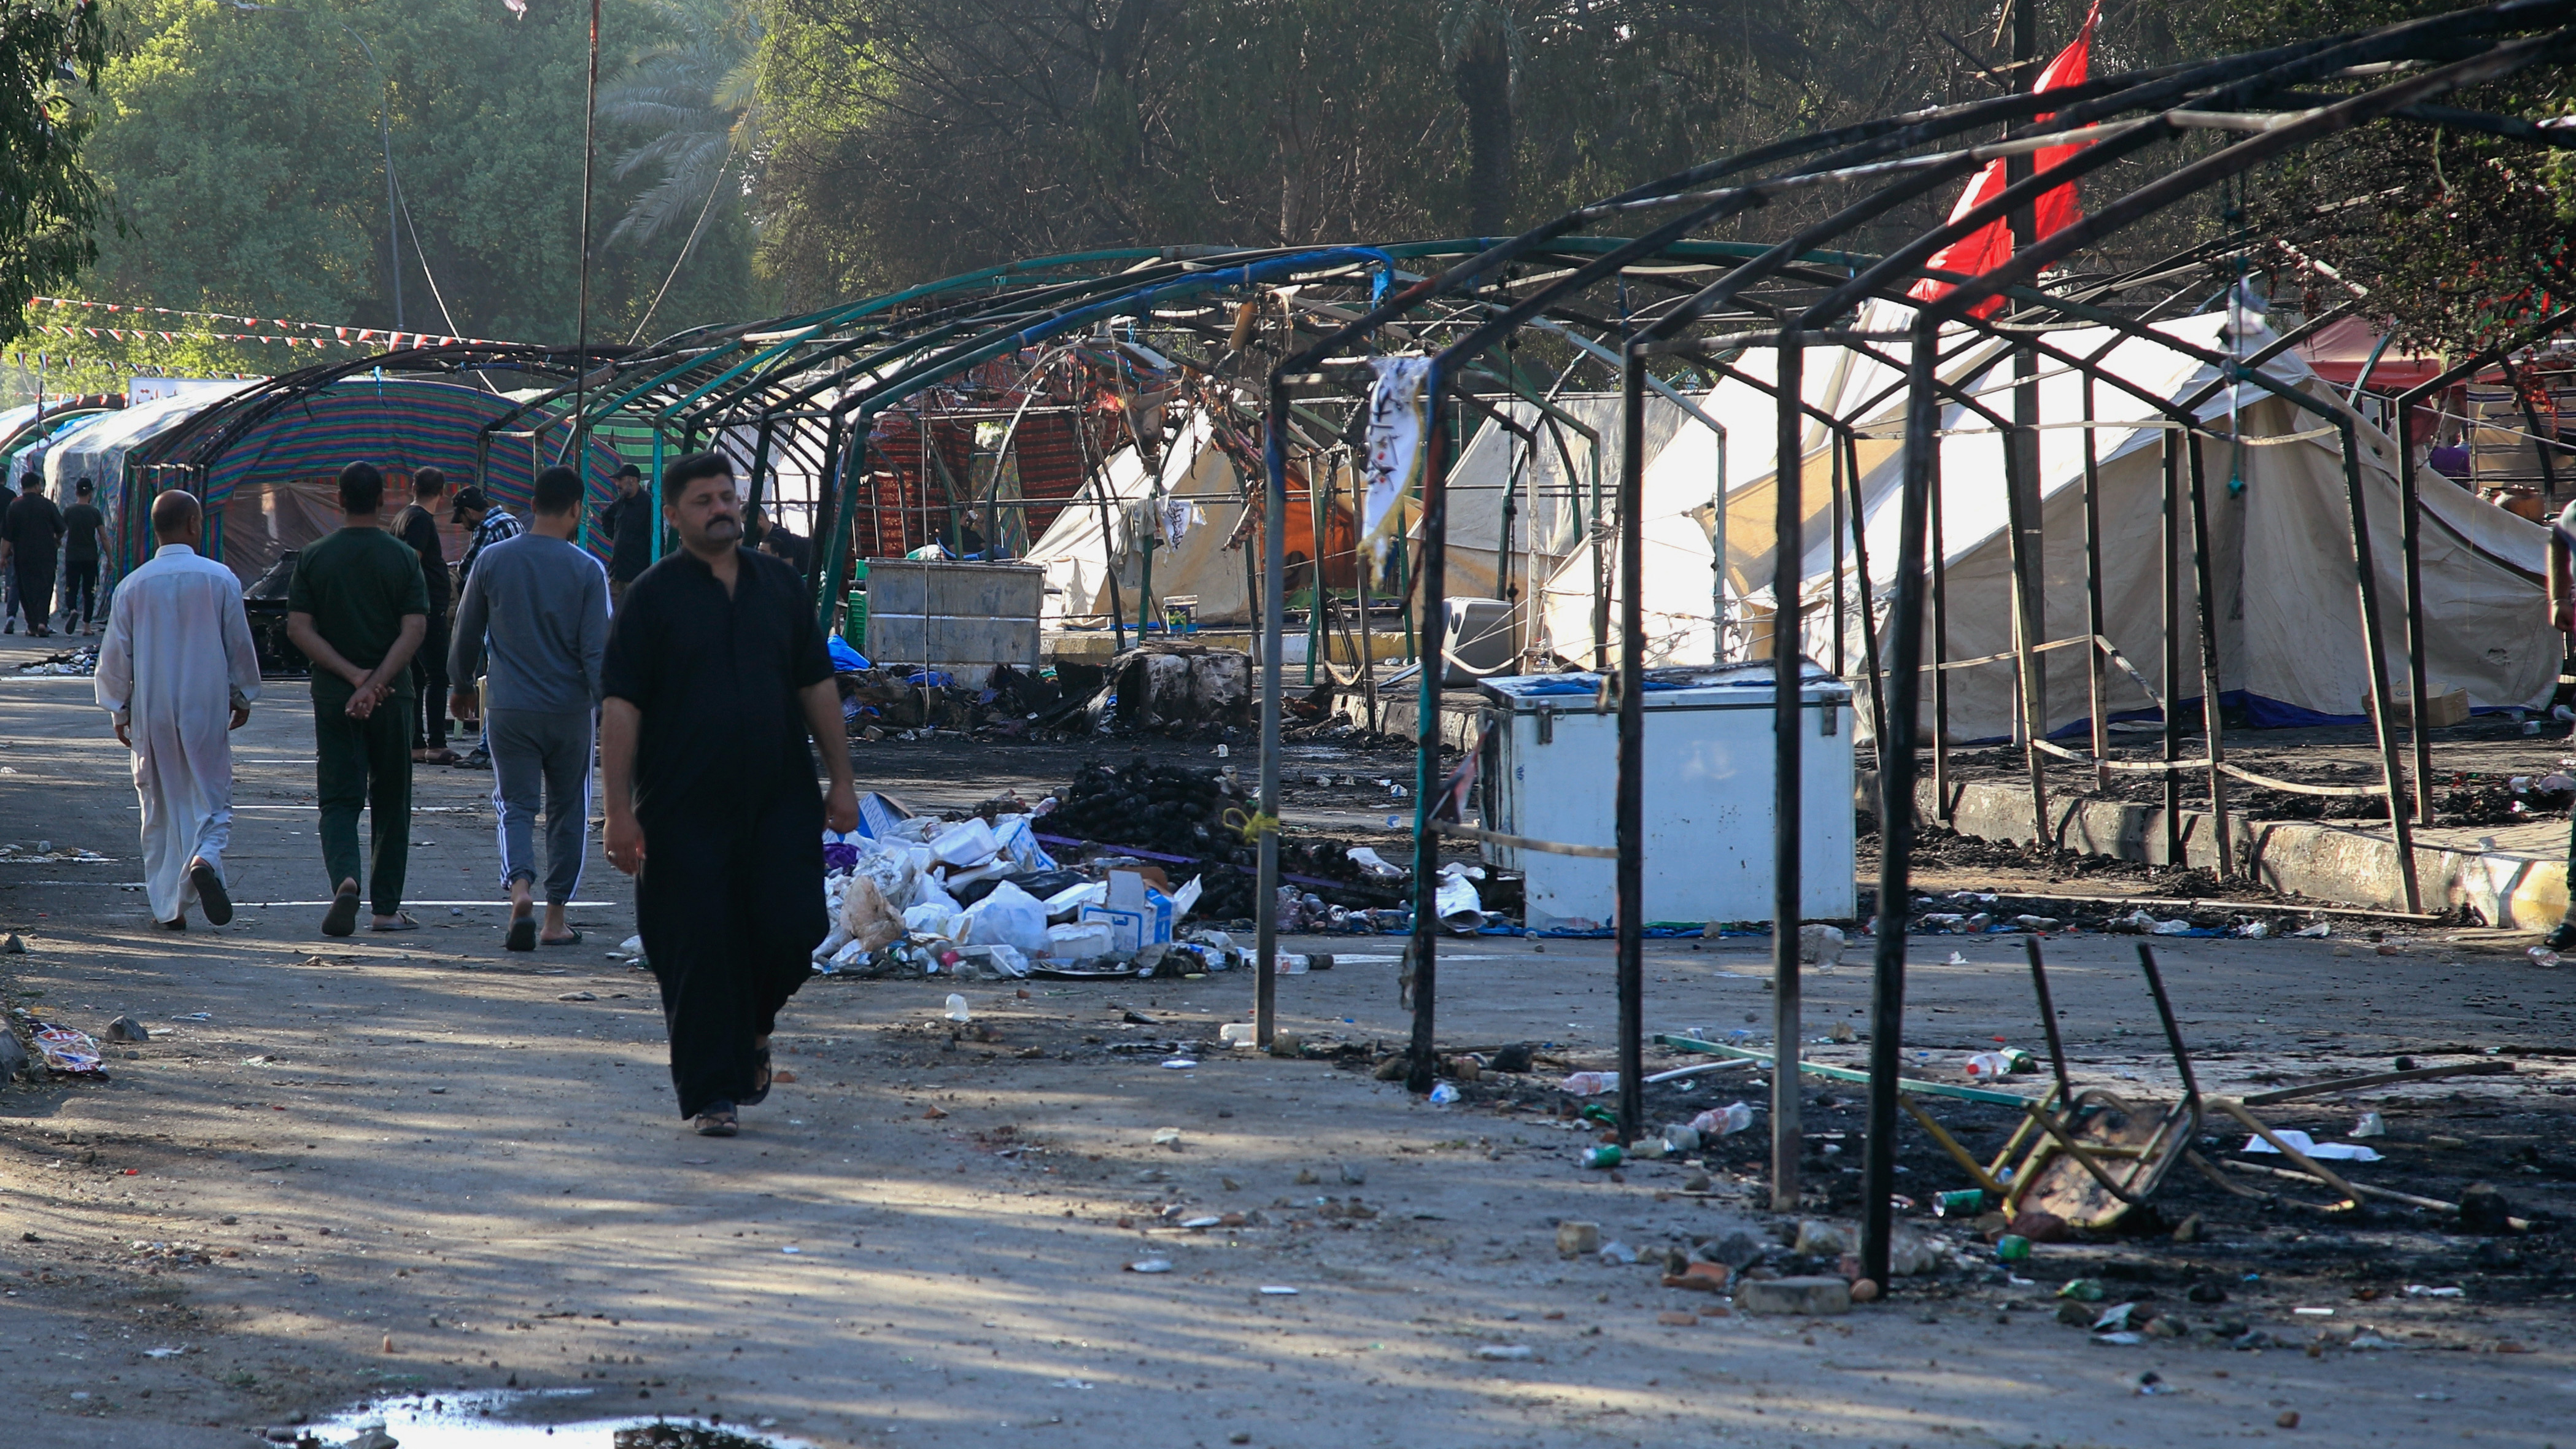 People walk amid burned tents outside the heavily fortified Green Zone in Baghdad, Iraq.